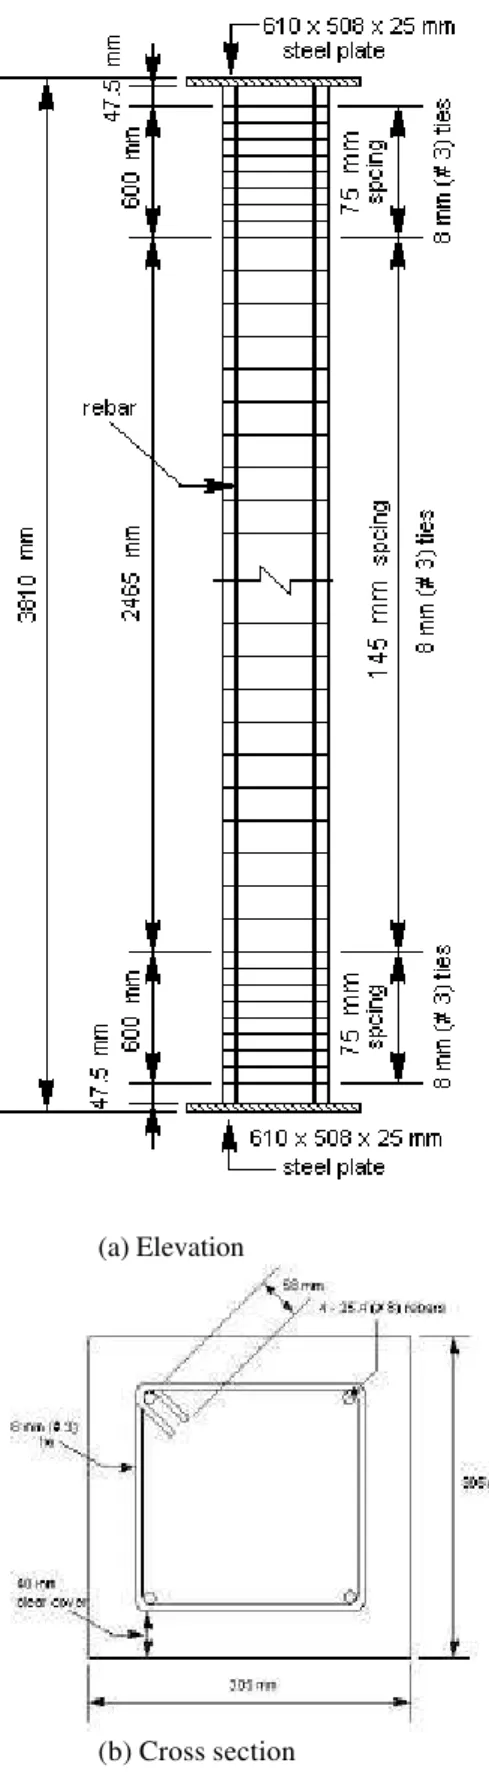 Figure 1 Elevation and cross-section of            Figure 2 Thermal and stress-strain network                      reinforced concrete columns                  in one-quarter cross section 